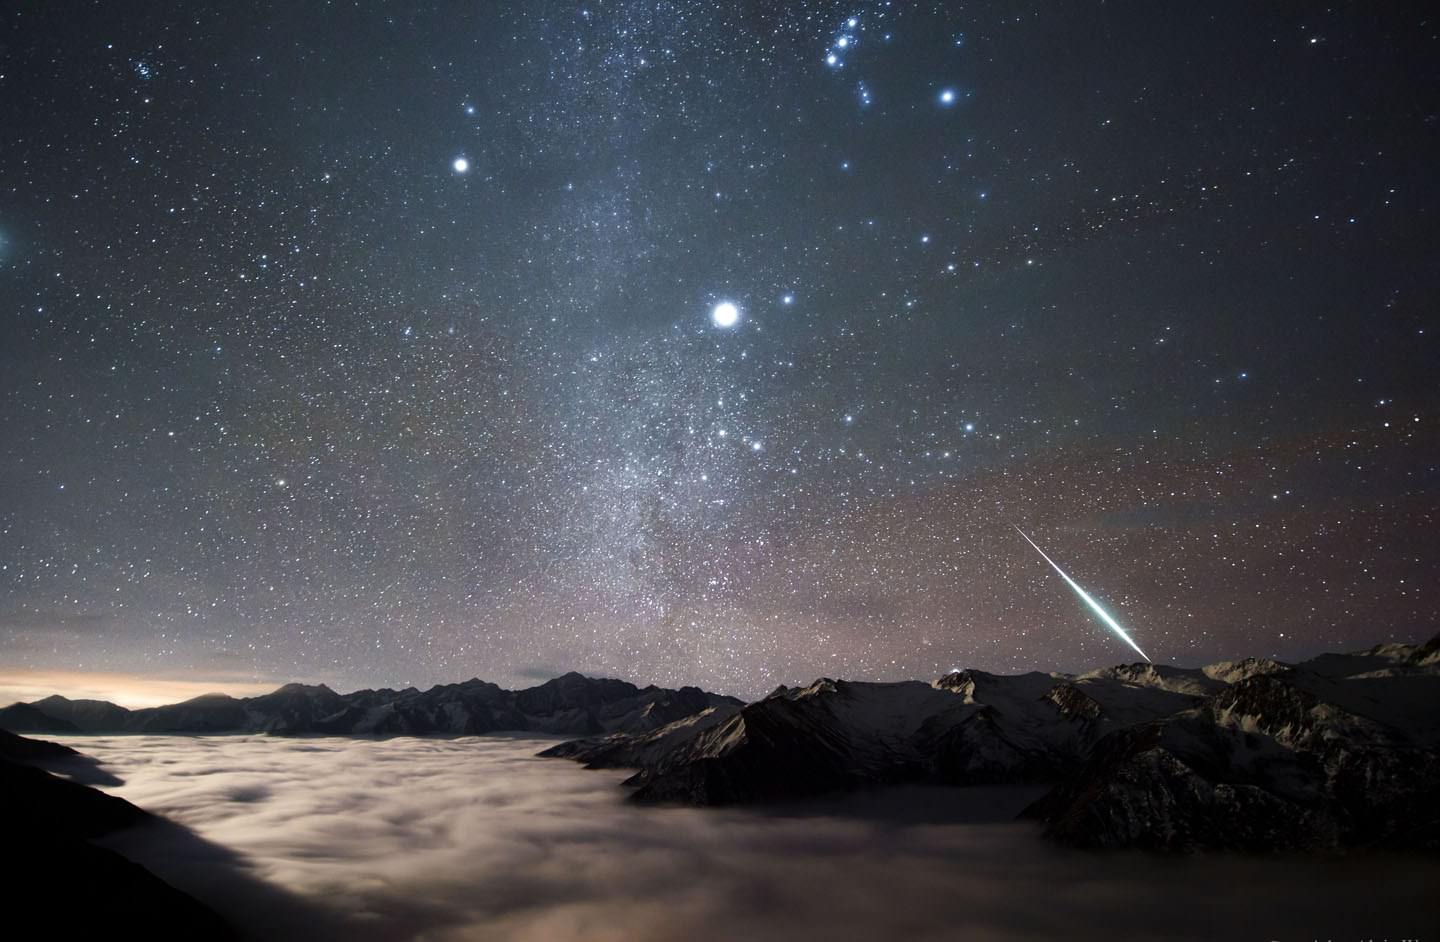 A brilliant Geminid flashes below Sirius and Orion over Mount Balang in China. Credit: NASA/Alvin Wu